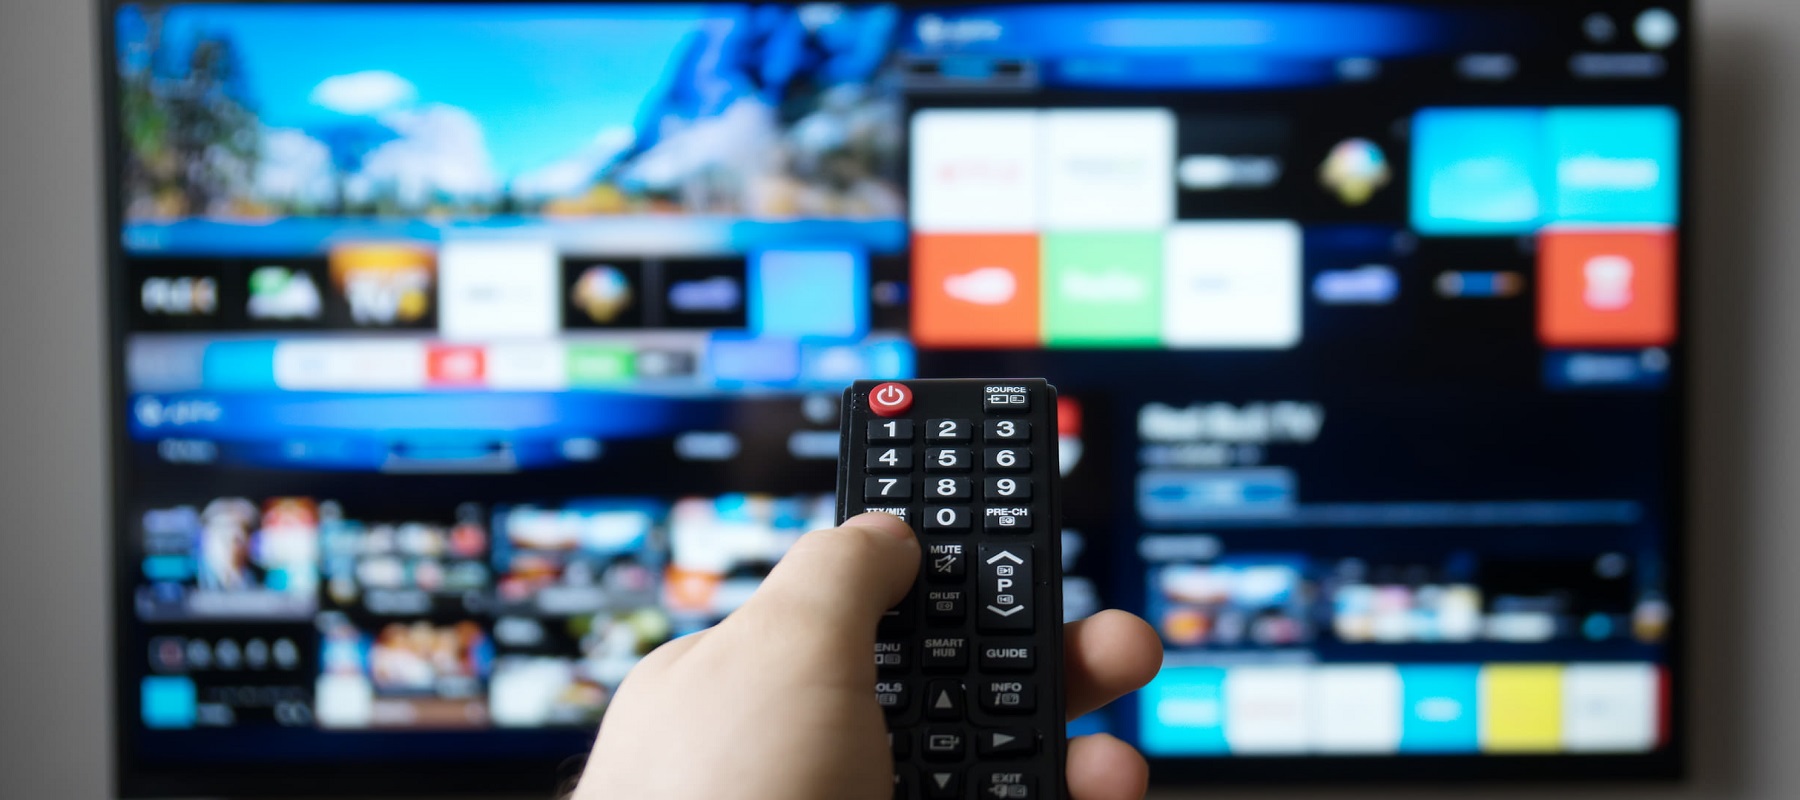 Brazil and Mexico outpace U.S in connected TV adoption rates, report